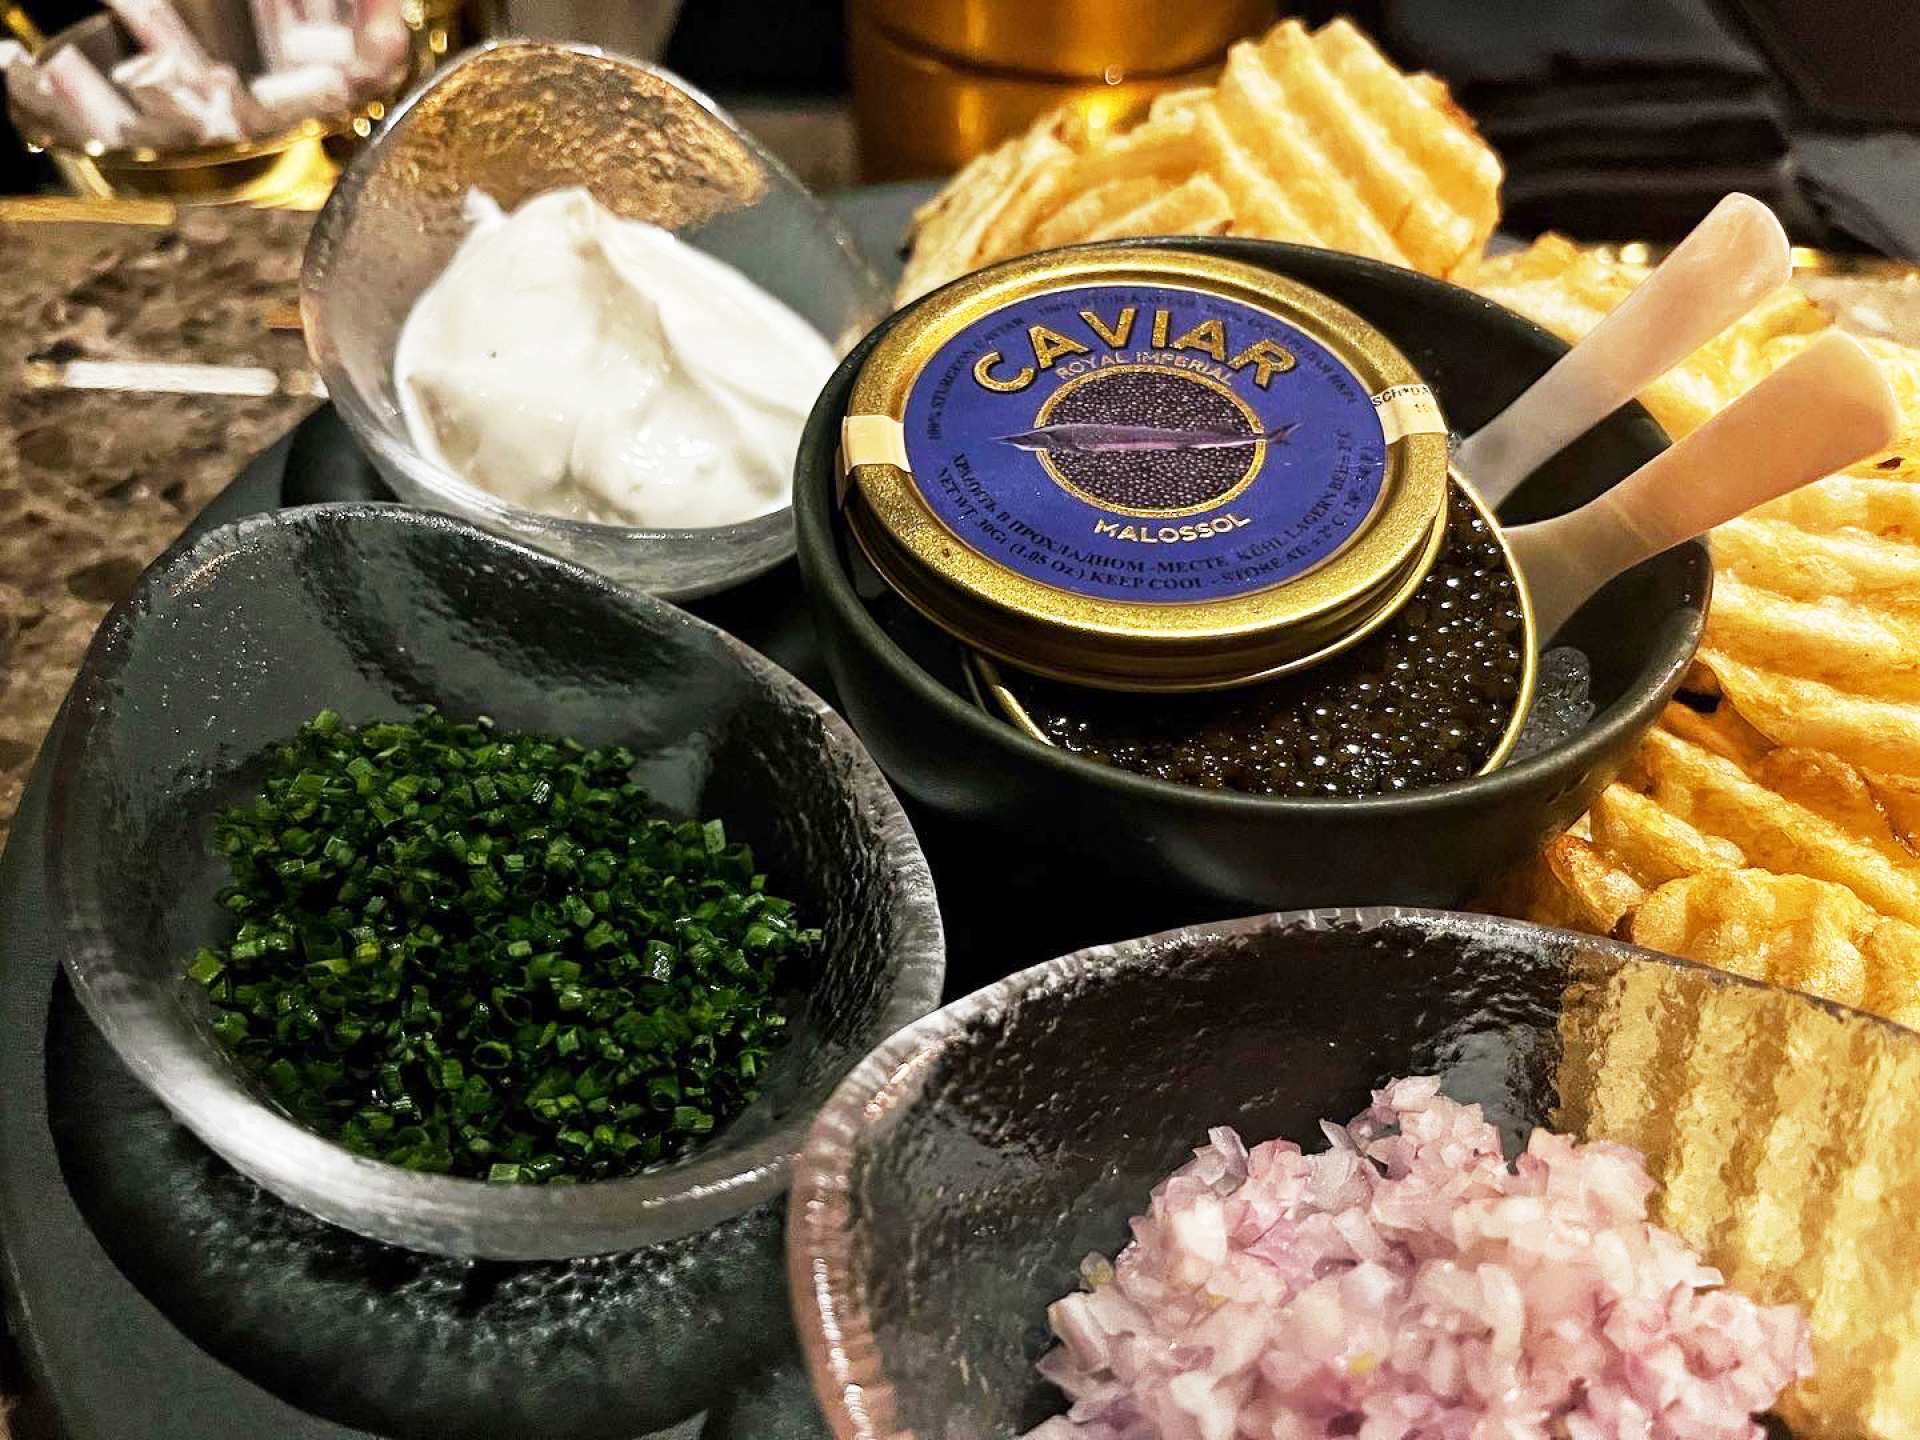 Parc Ave's Kaluga Gold Caviar served with potato chips